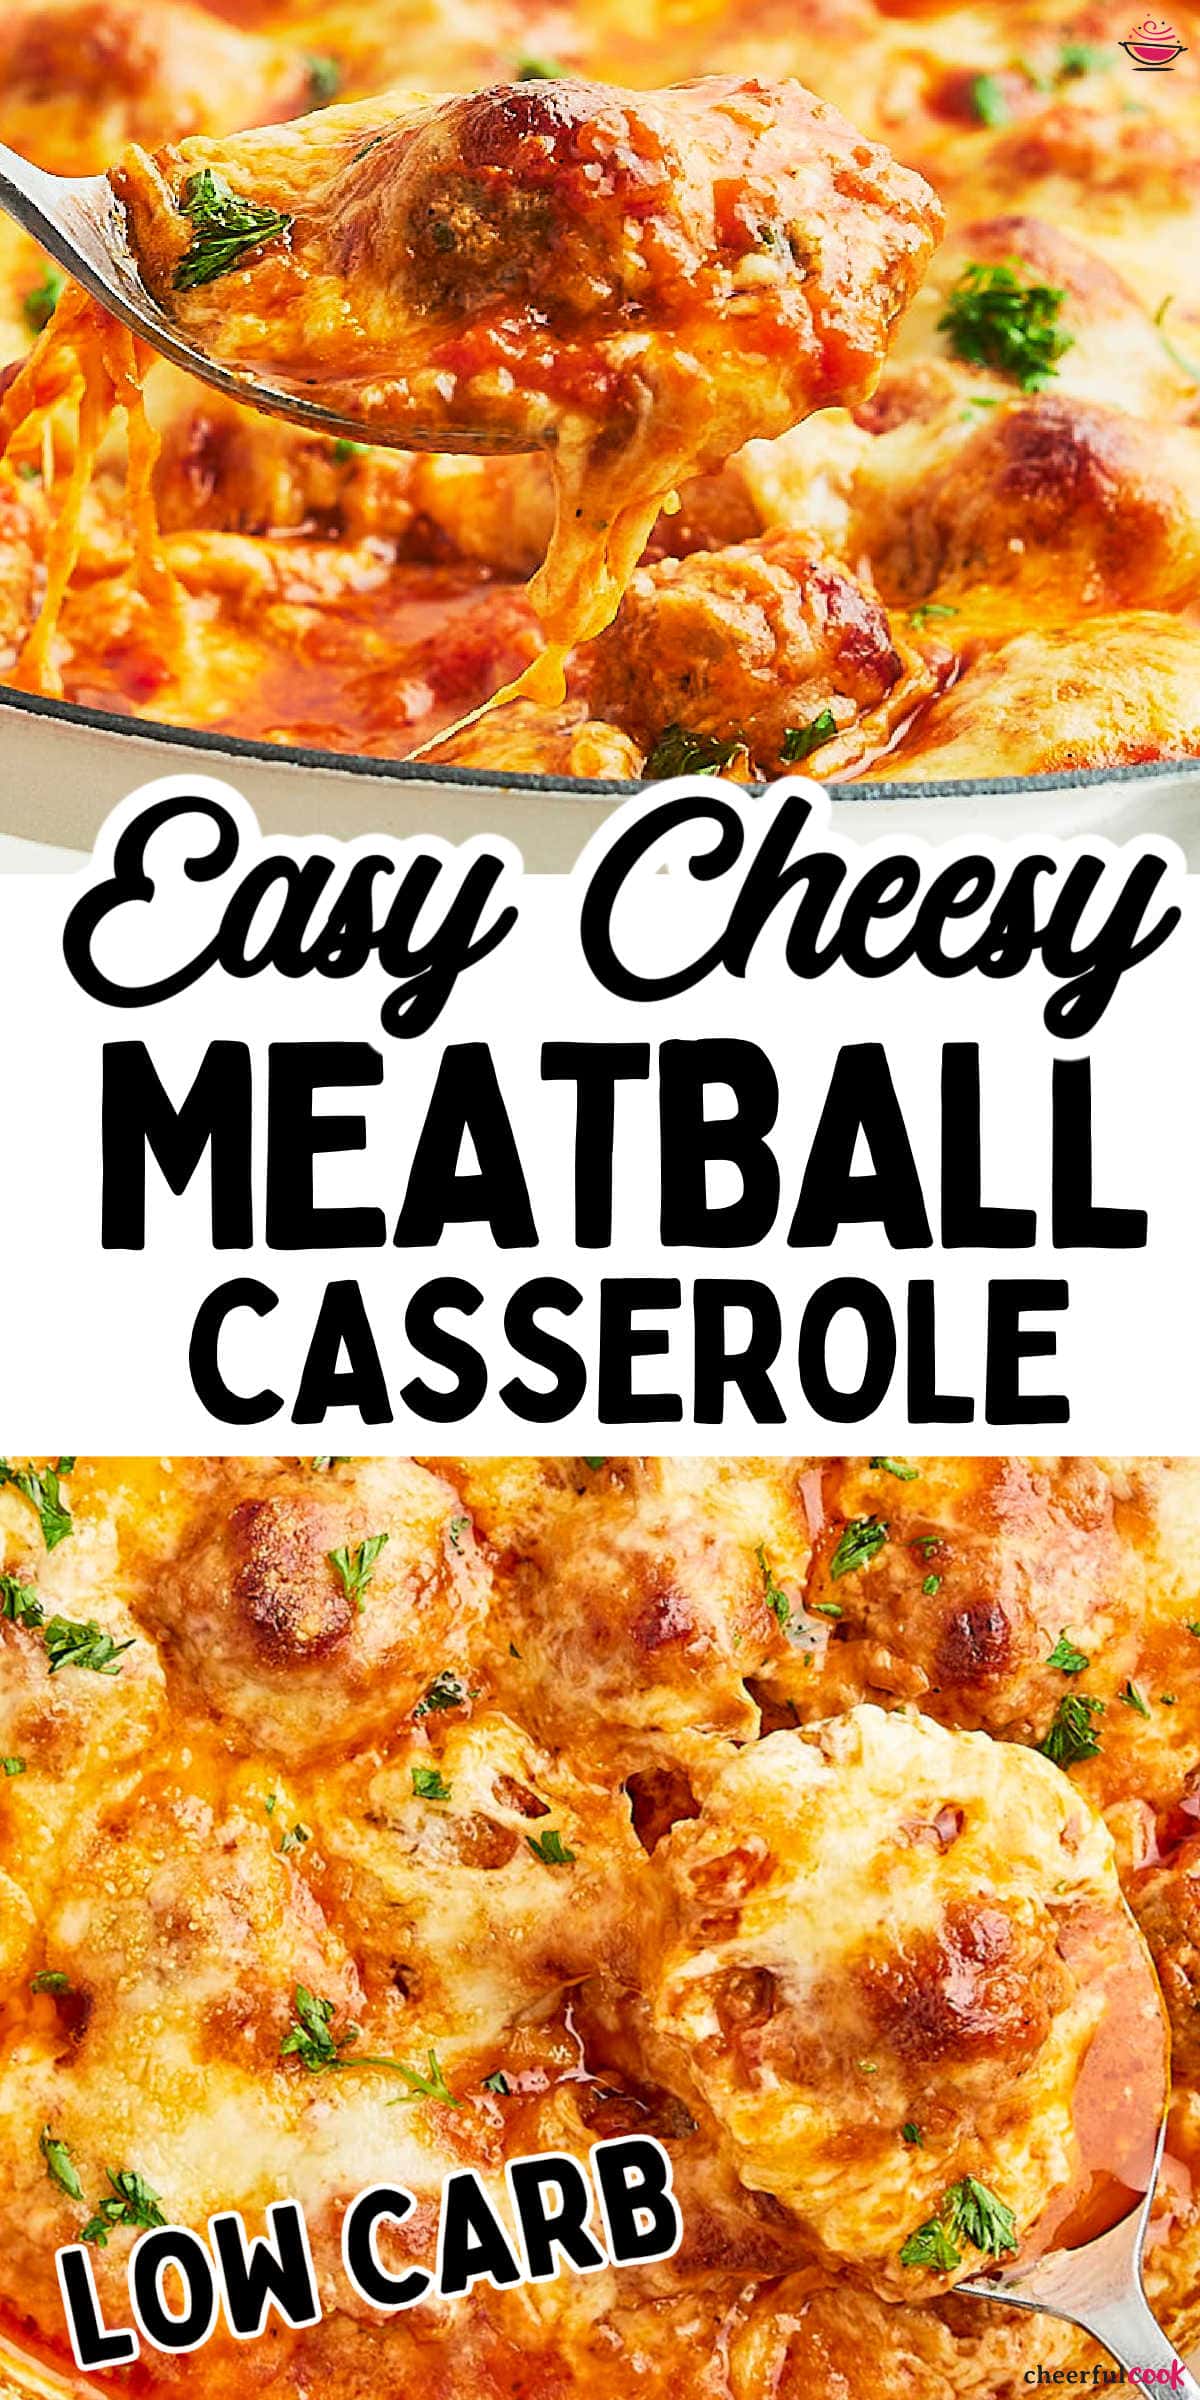 Dive into the delightful flavors of our Cheesy Meatball Casserole! This crowd-pleaser combines juicy meatballs, tangy marinara, and heaps of melted cheese for a meal that's pure comfort. One bite, and you'll be hooked! 😋🍽️ #cheerfulcook #cheesycasserole #casserole #meatballcasserole #ComfortFood  via @cheerfulcook